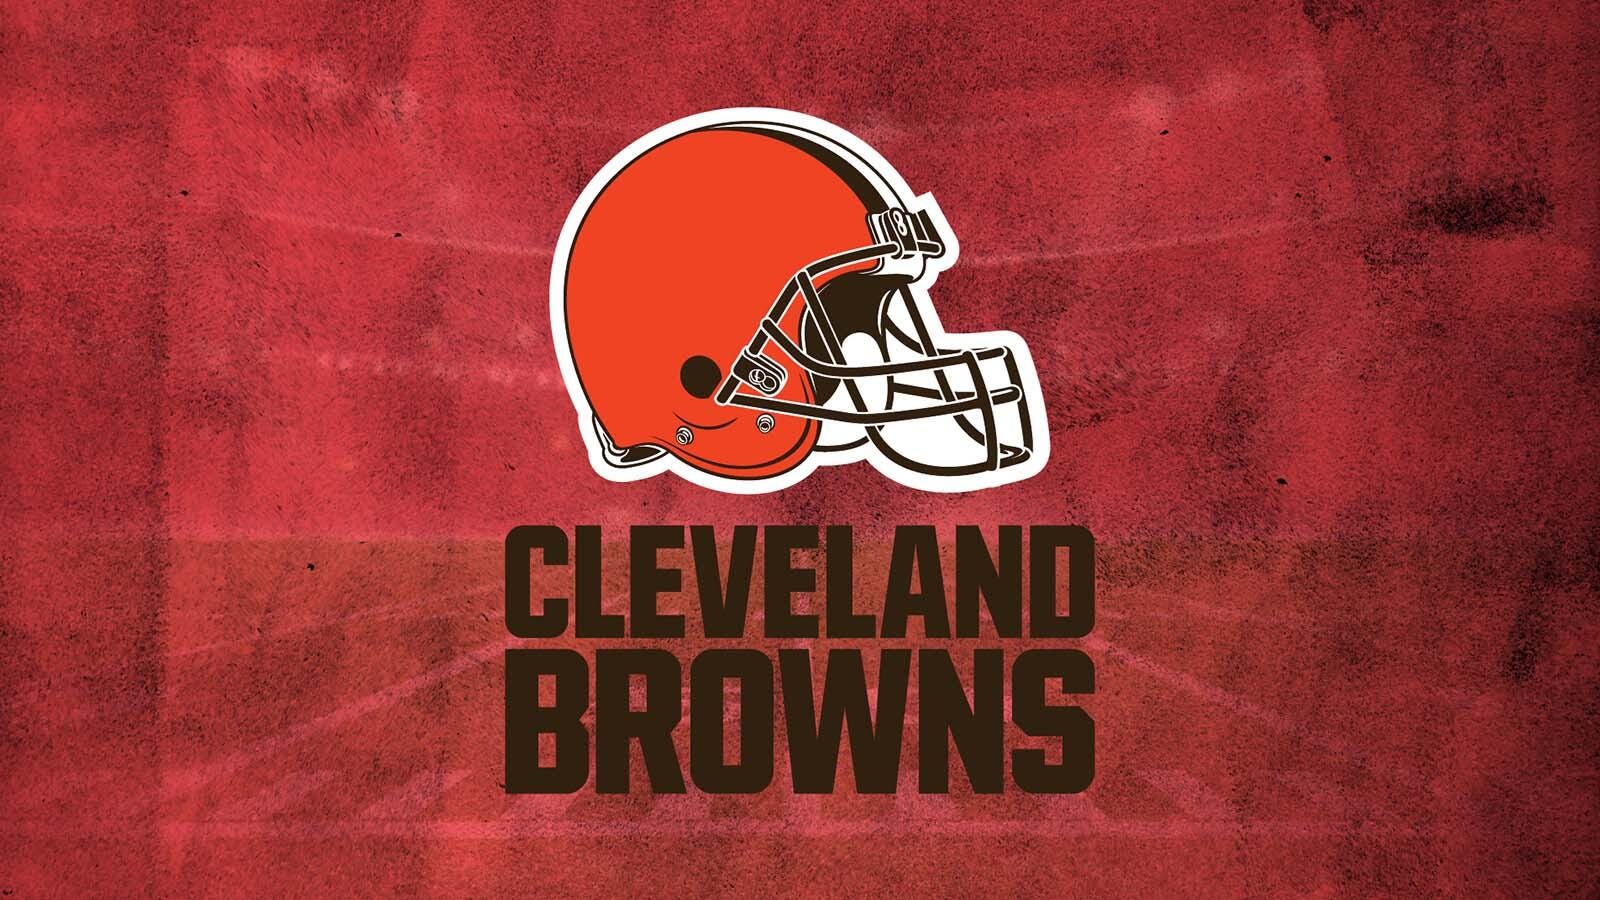 channel browns game tonight